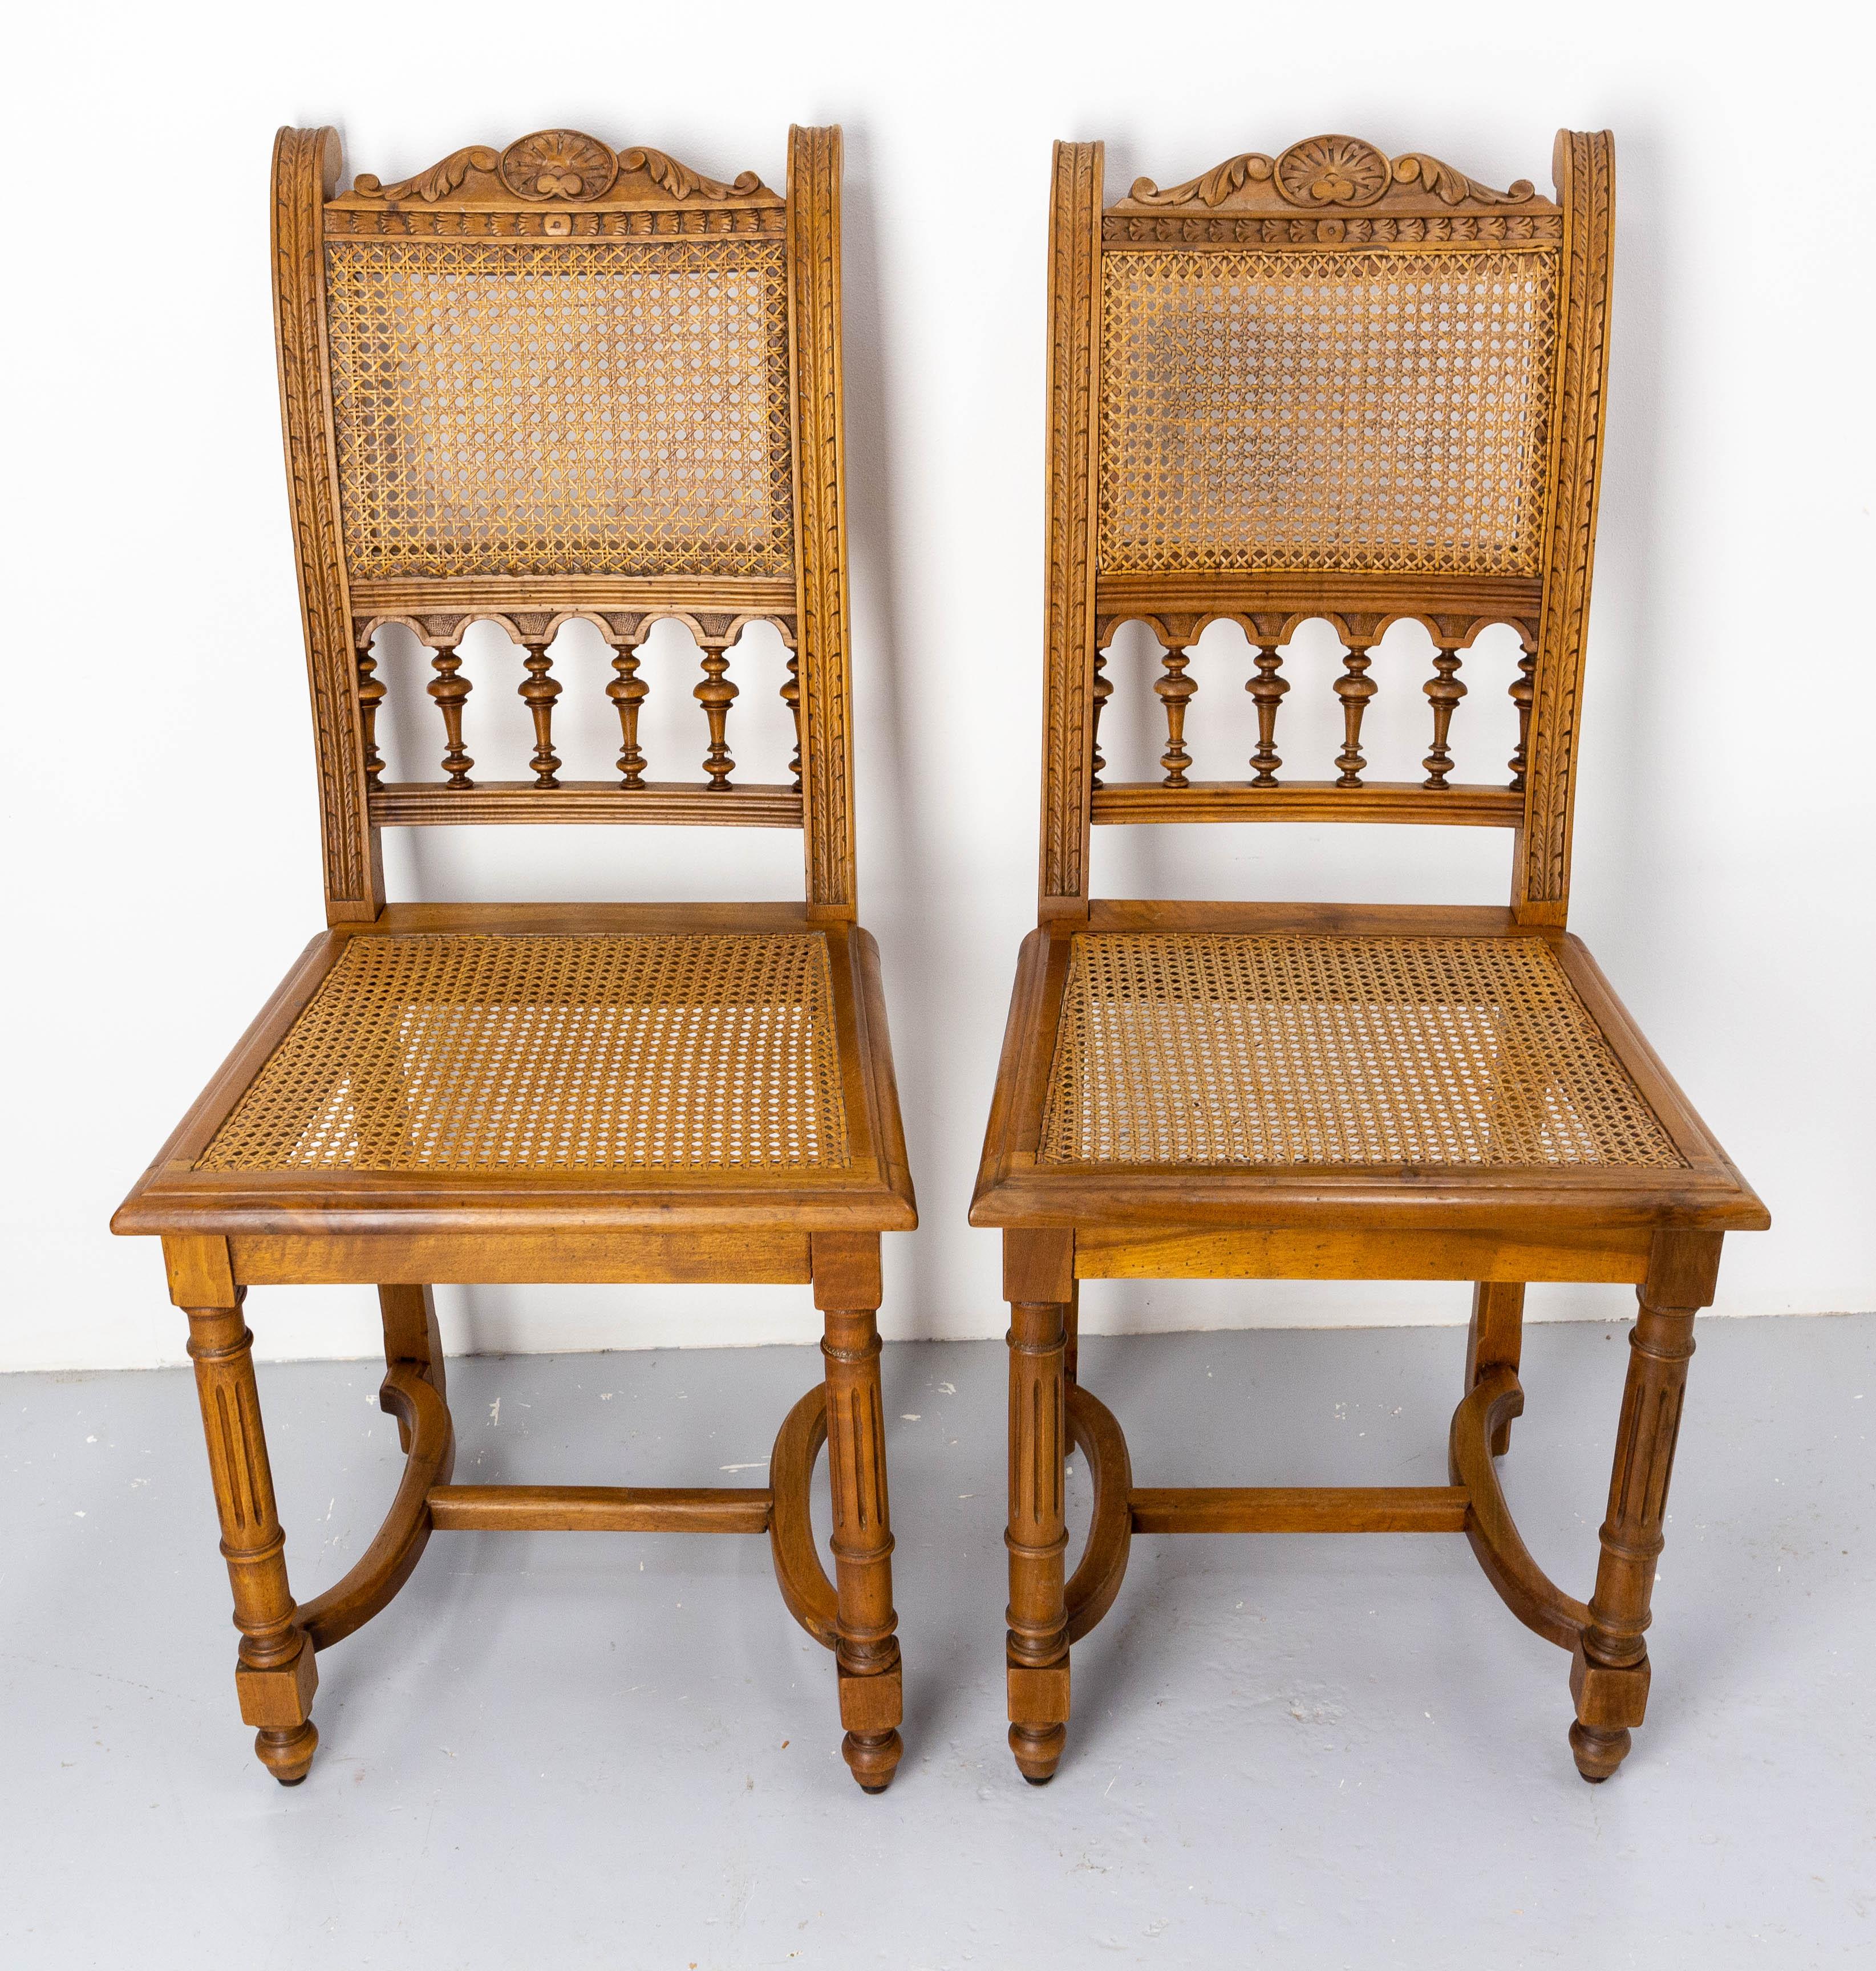 Four Chairs Walnut and Cane in the Louis XIII Style, French, circa 1900 In Good Condition For Sale In Labrit, Landes